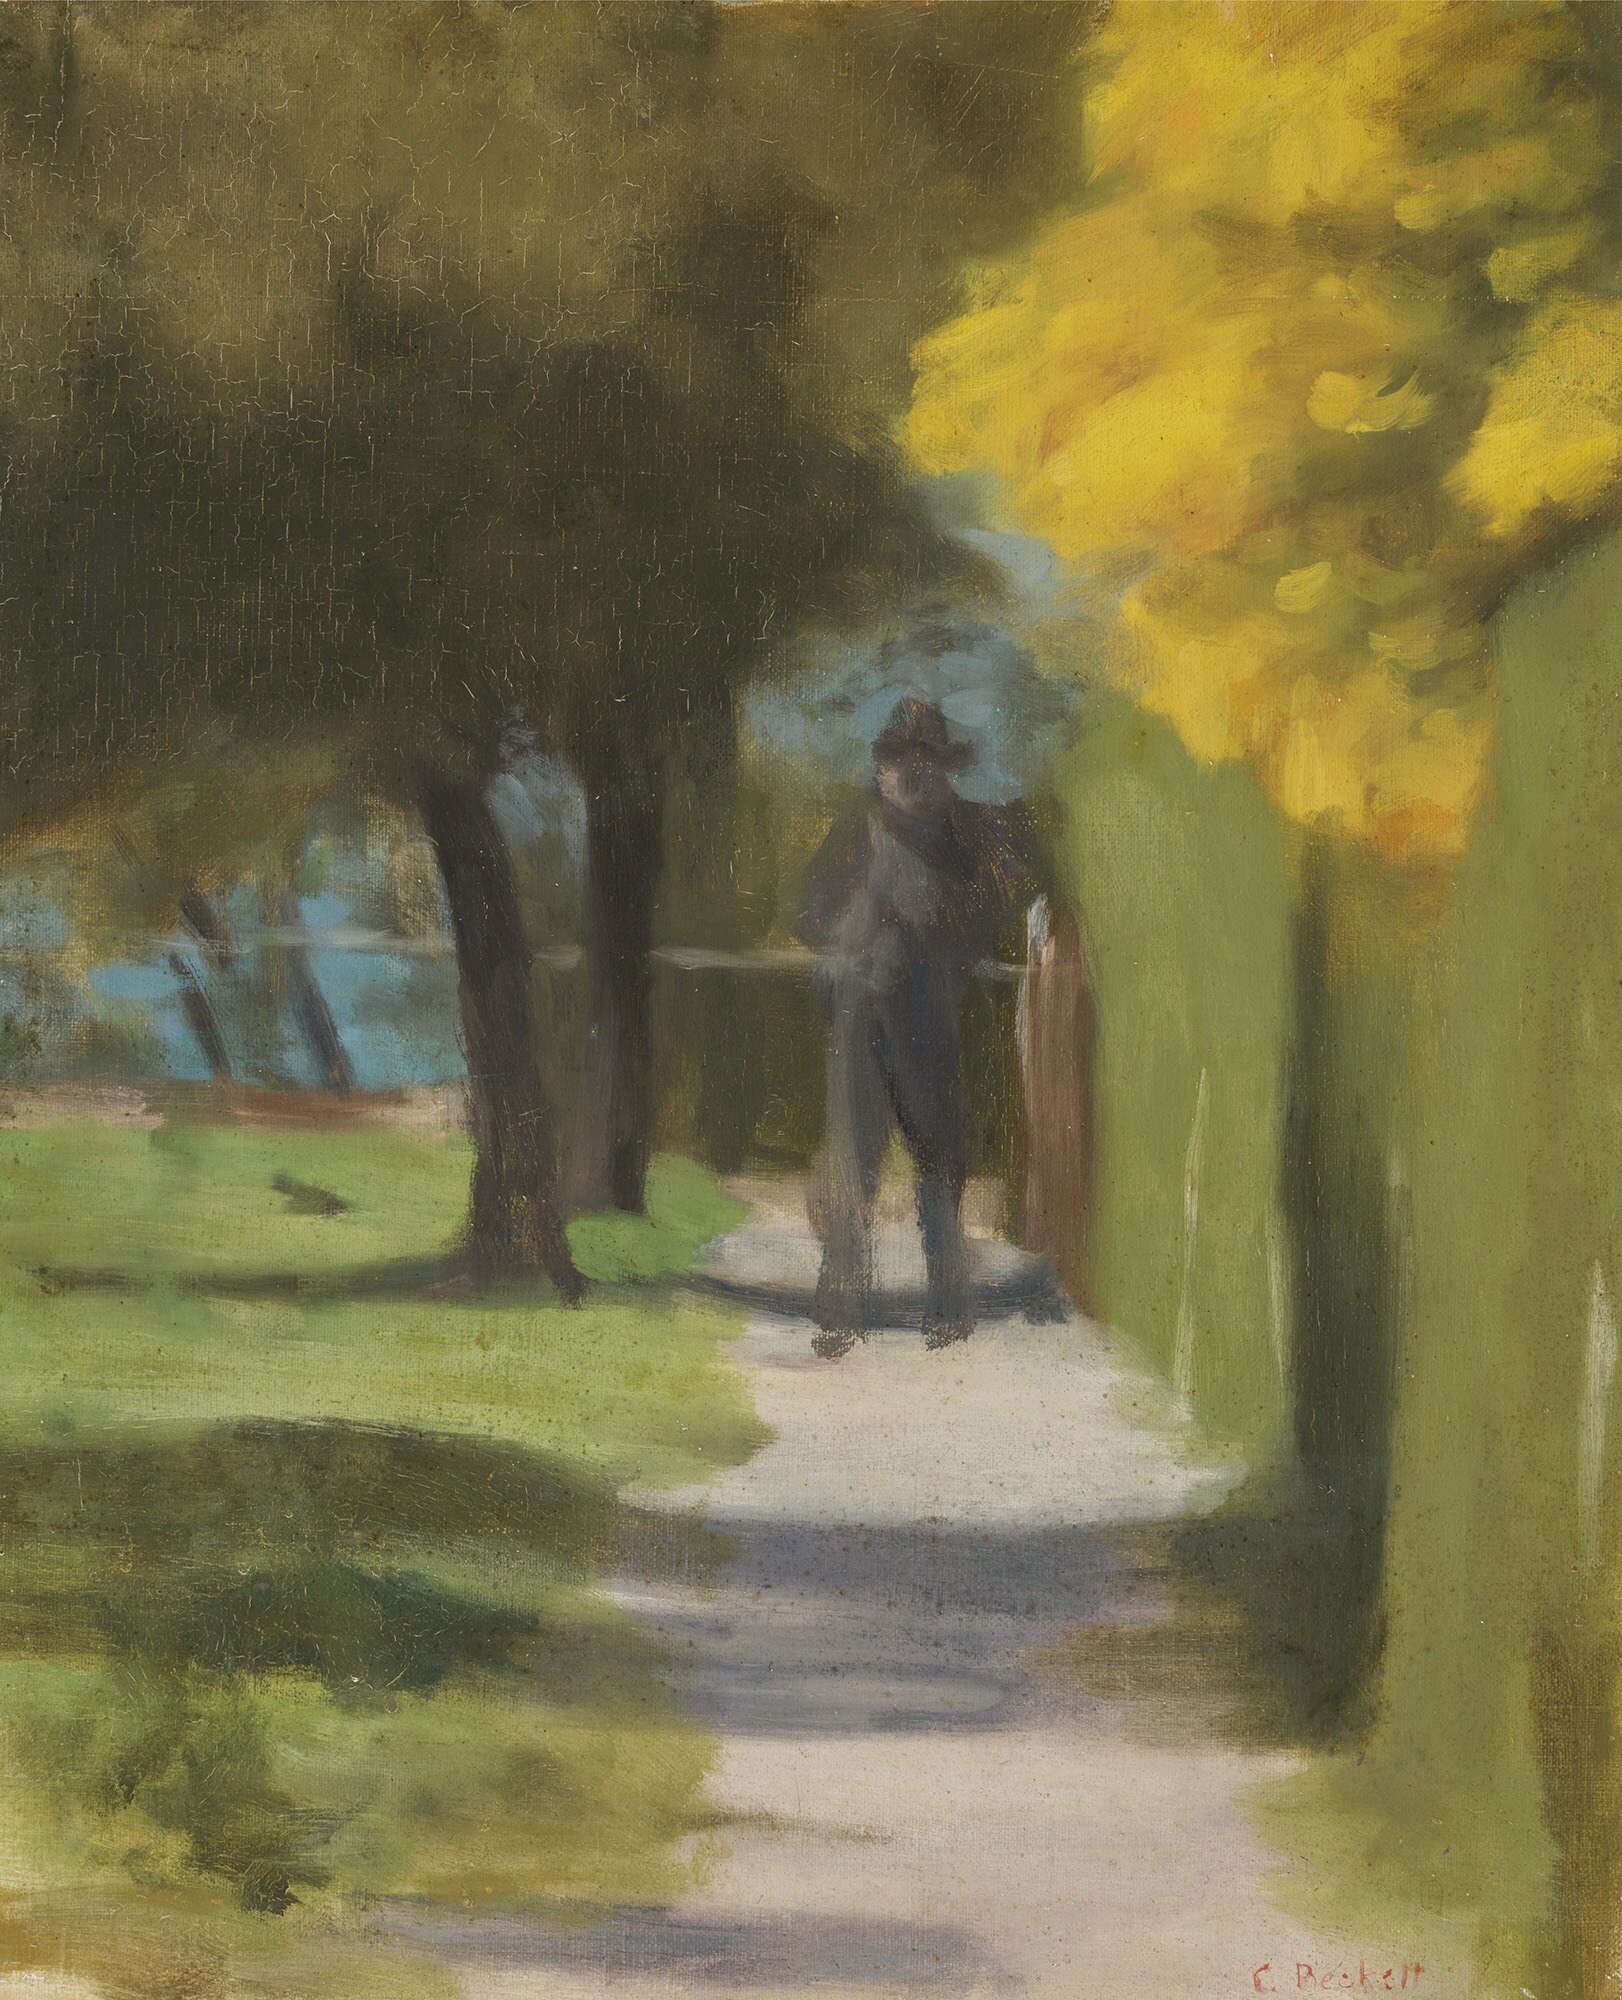 A painting by Clarice Beckett, blurry realism, with a man in the distance in a suburban street